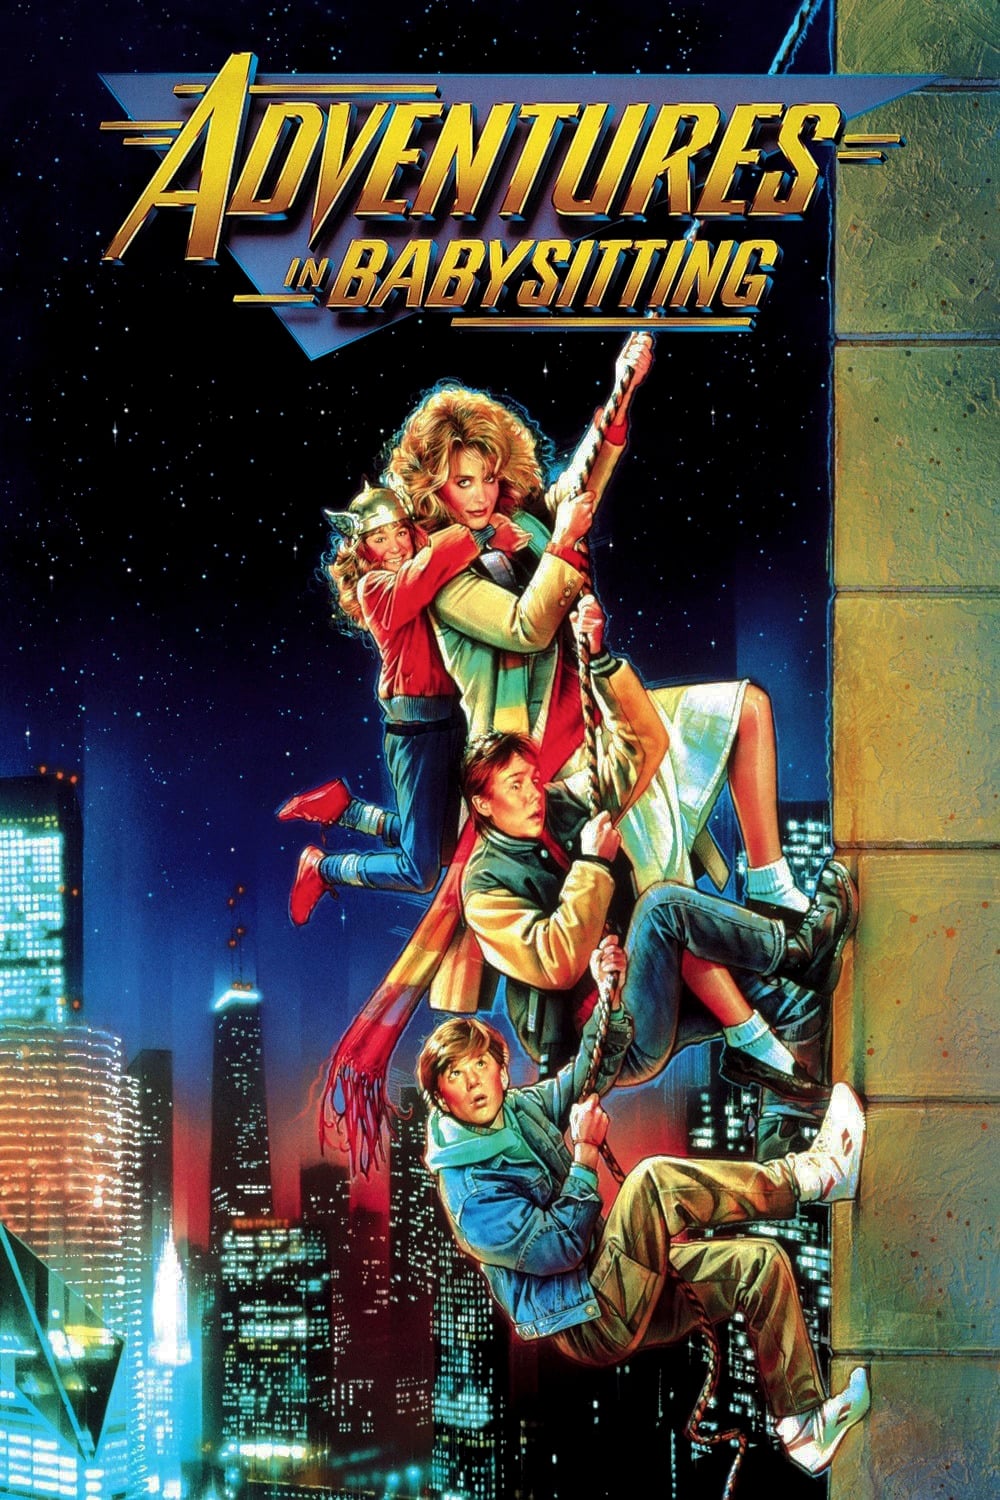 Adventures in babysitting  Vintage Movie Poster A0-A1-A2-A3-A4-A5-A6-MAXI 430